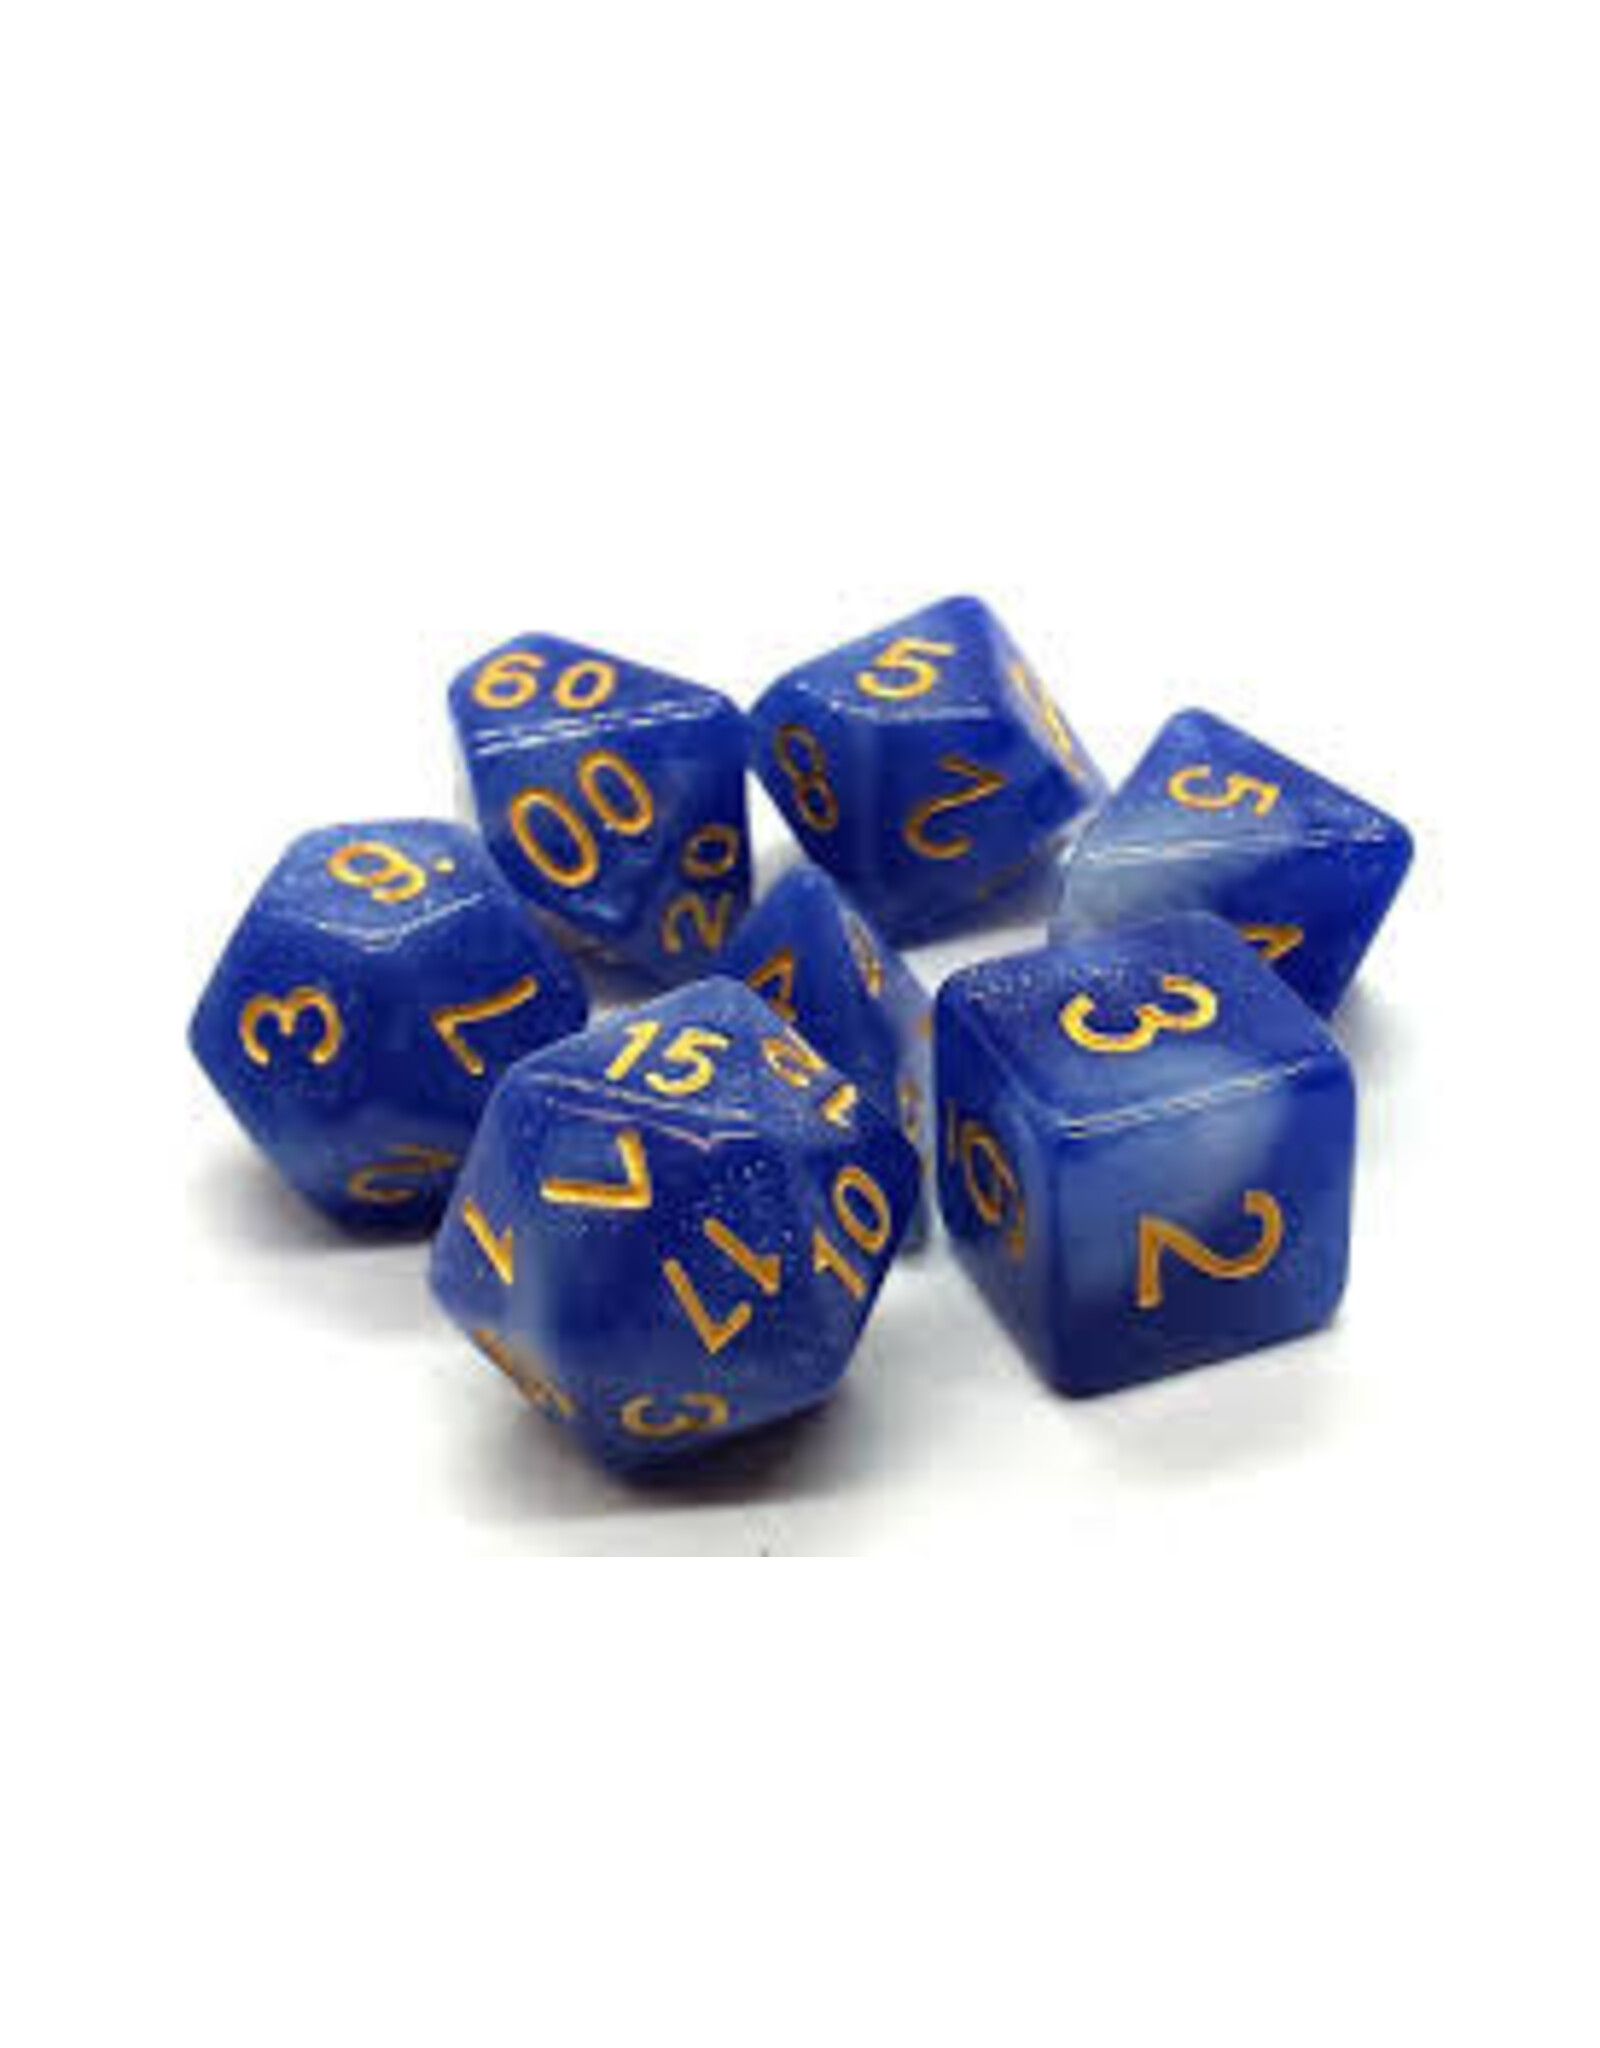 Old School Dice & Accesories Galaxy Blue & White